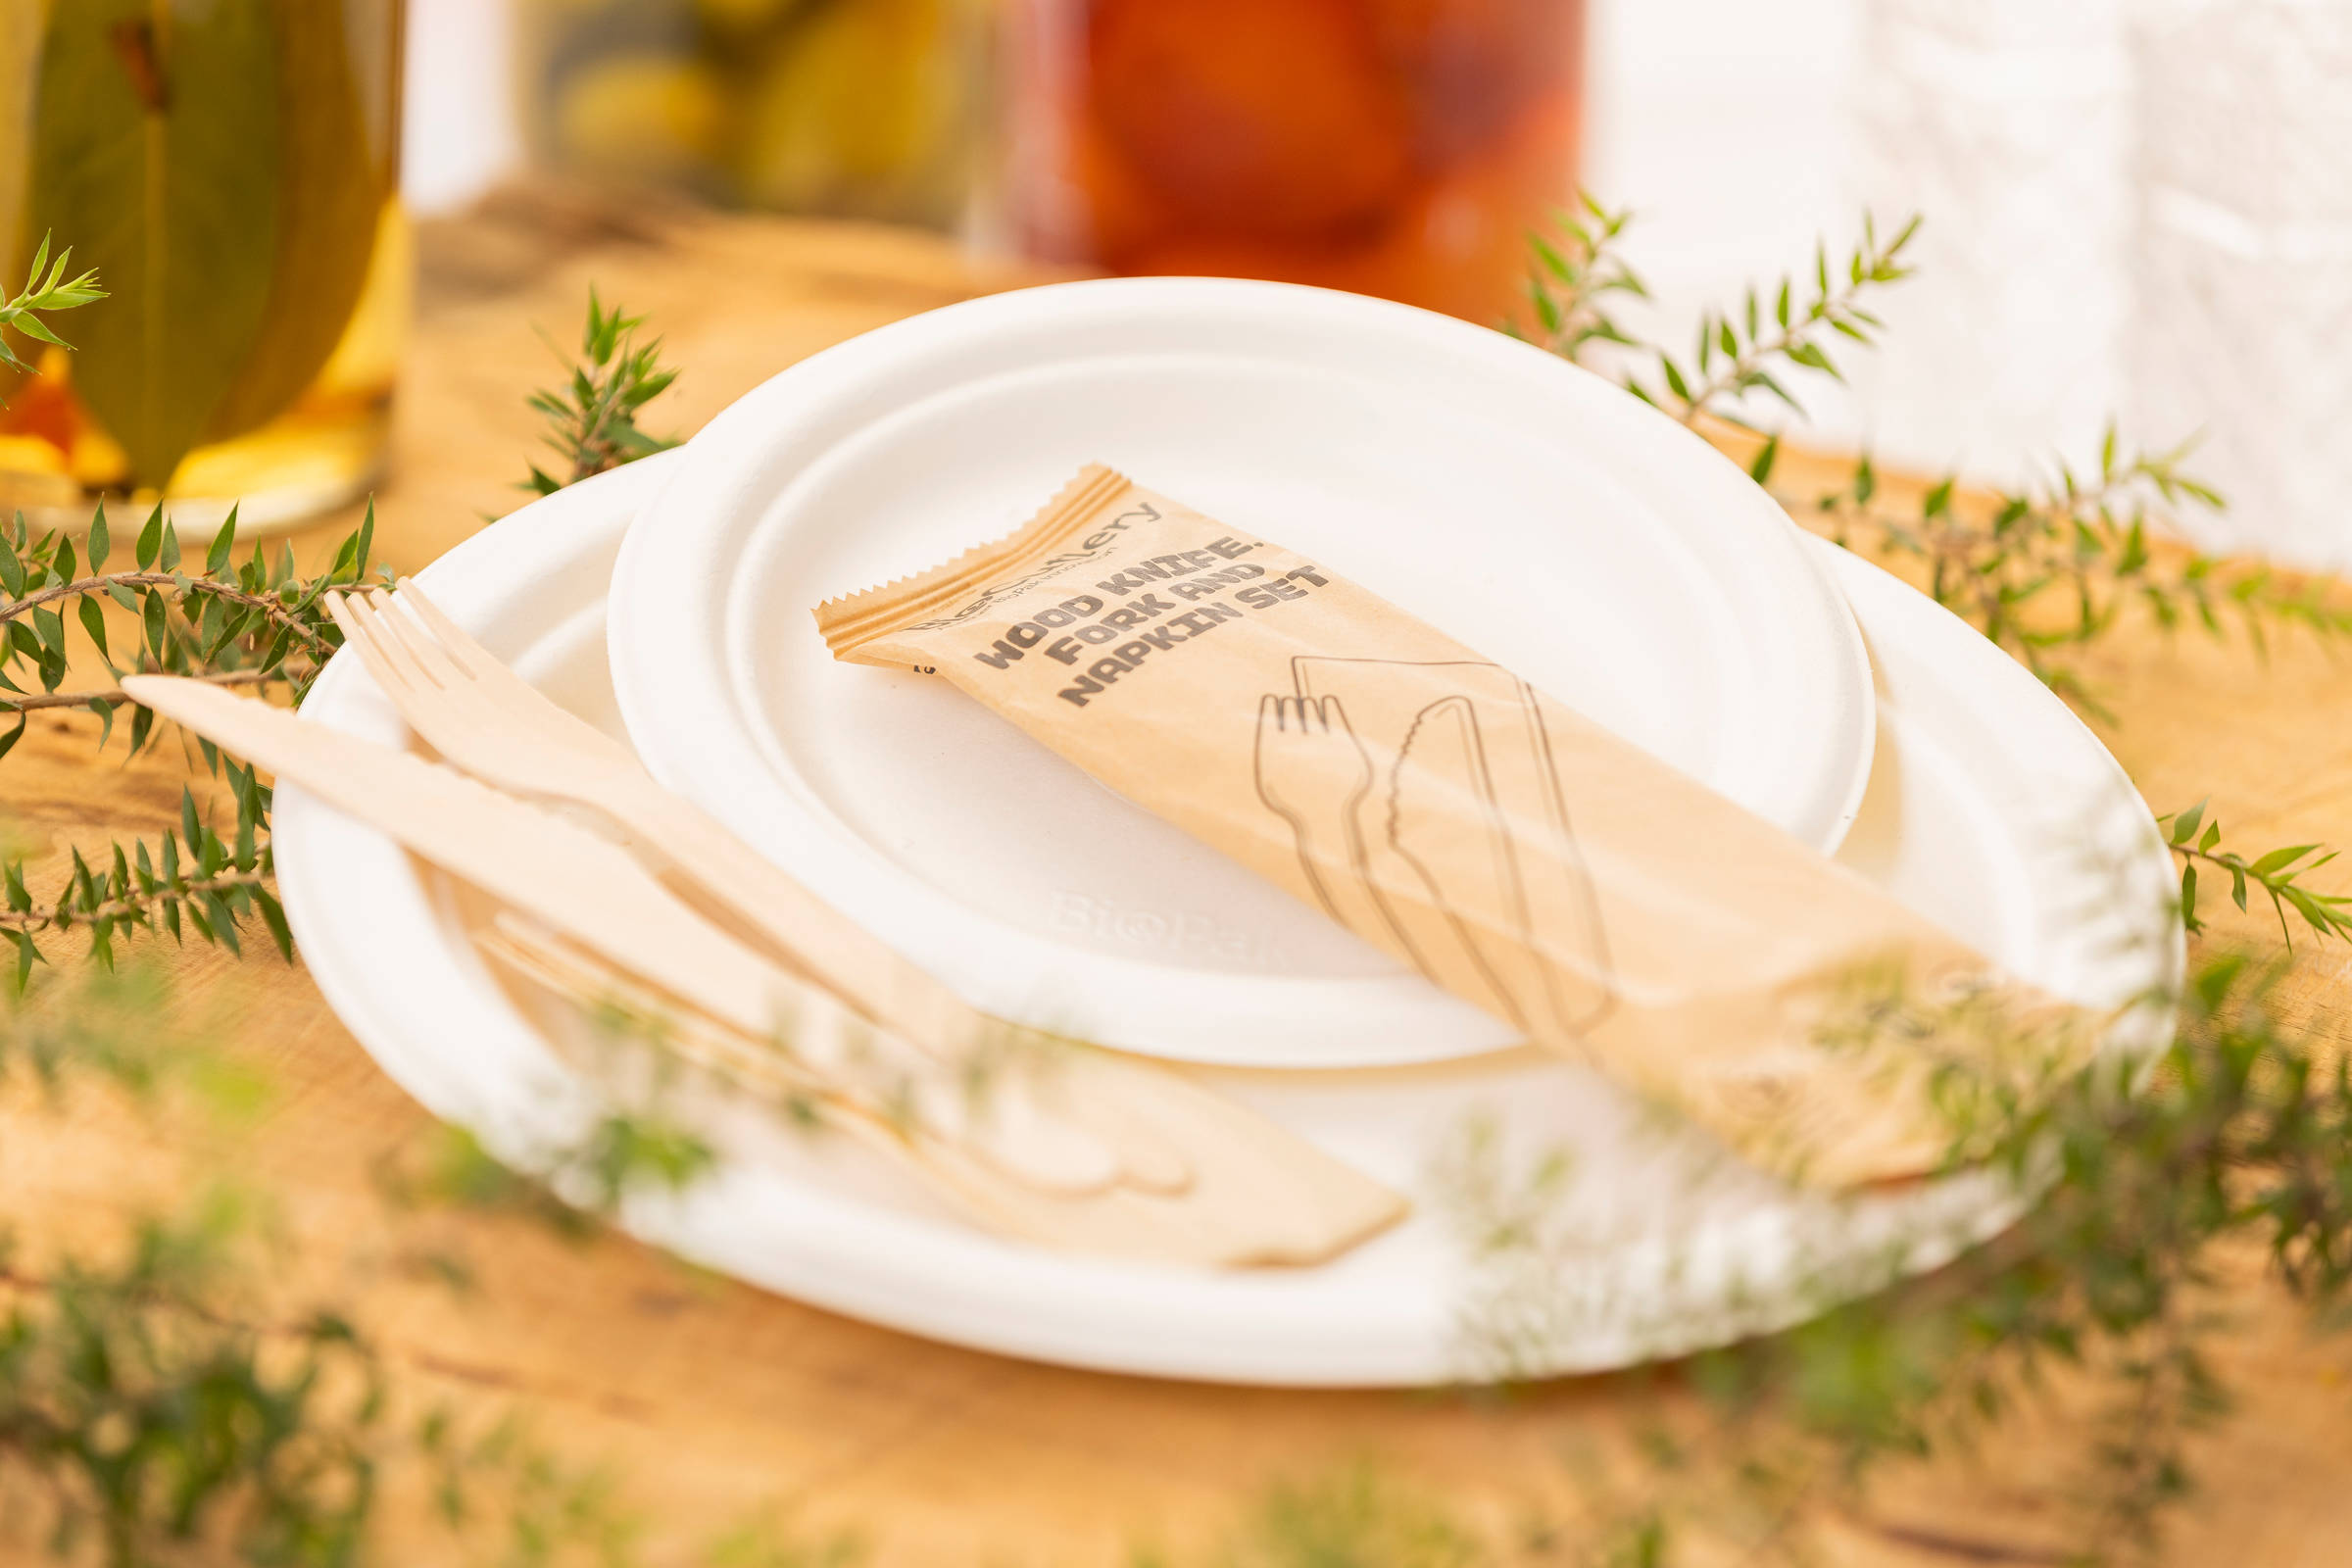 Compostable plates and cutlery. Credit: Richard Jupe.